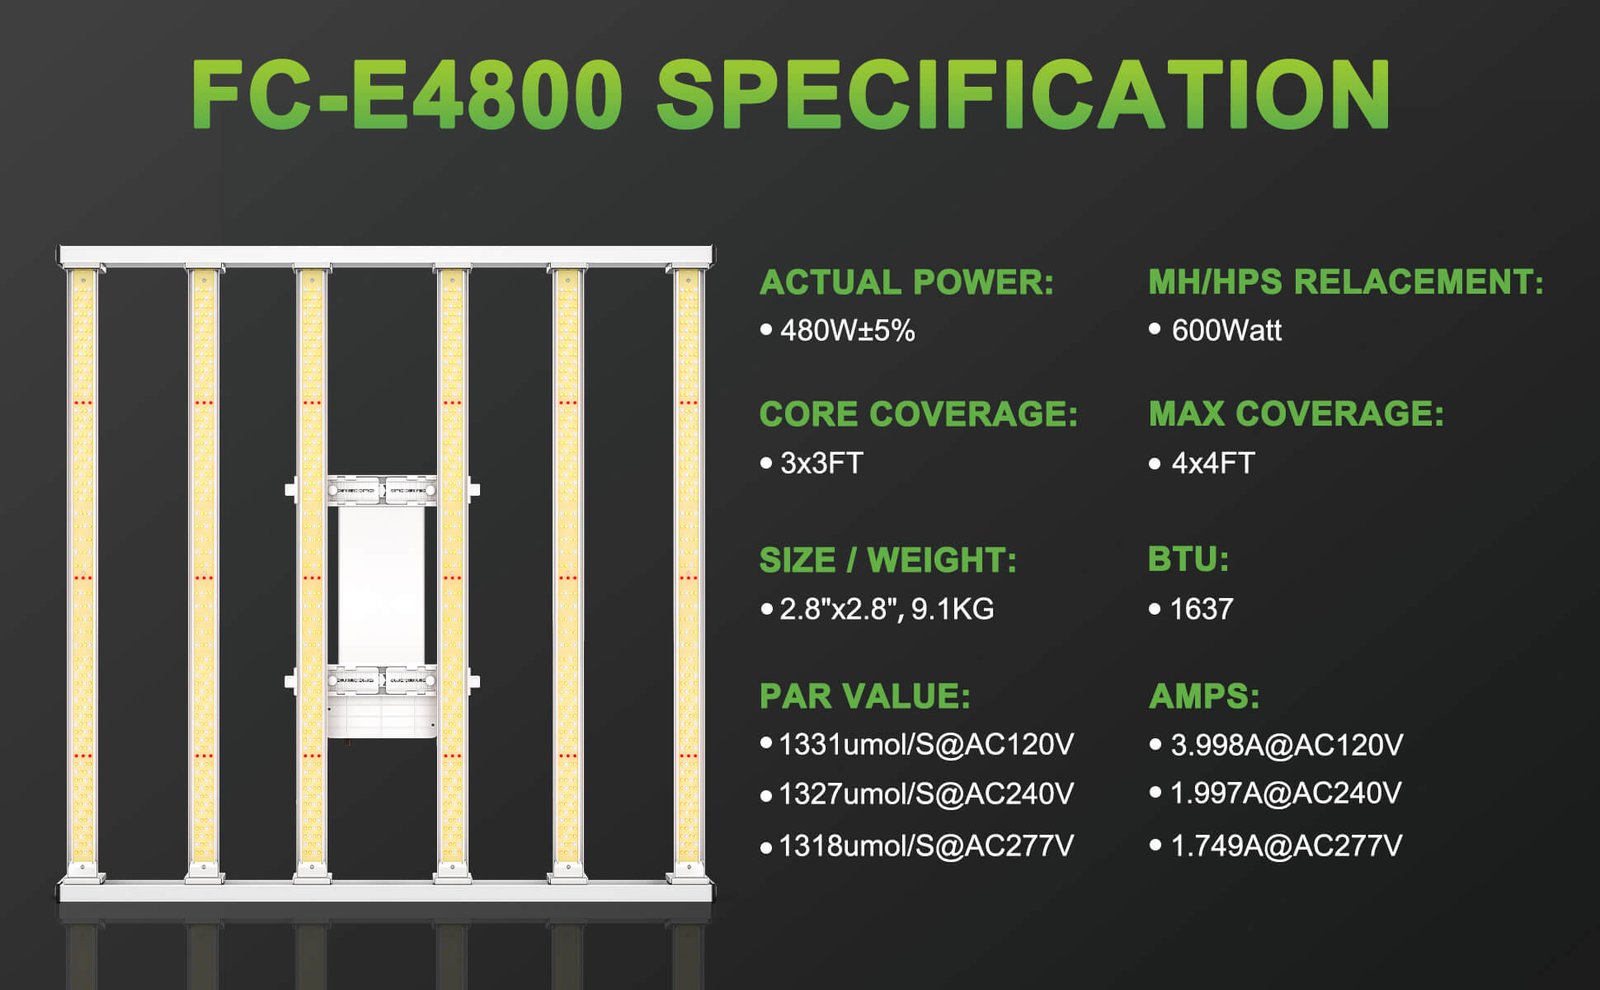 FC-E4800 specifications